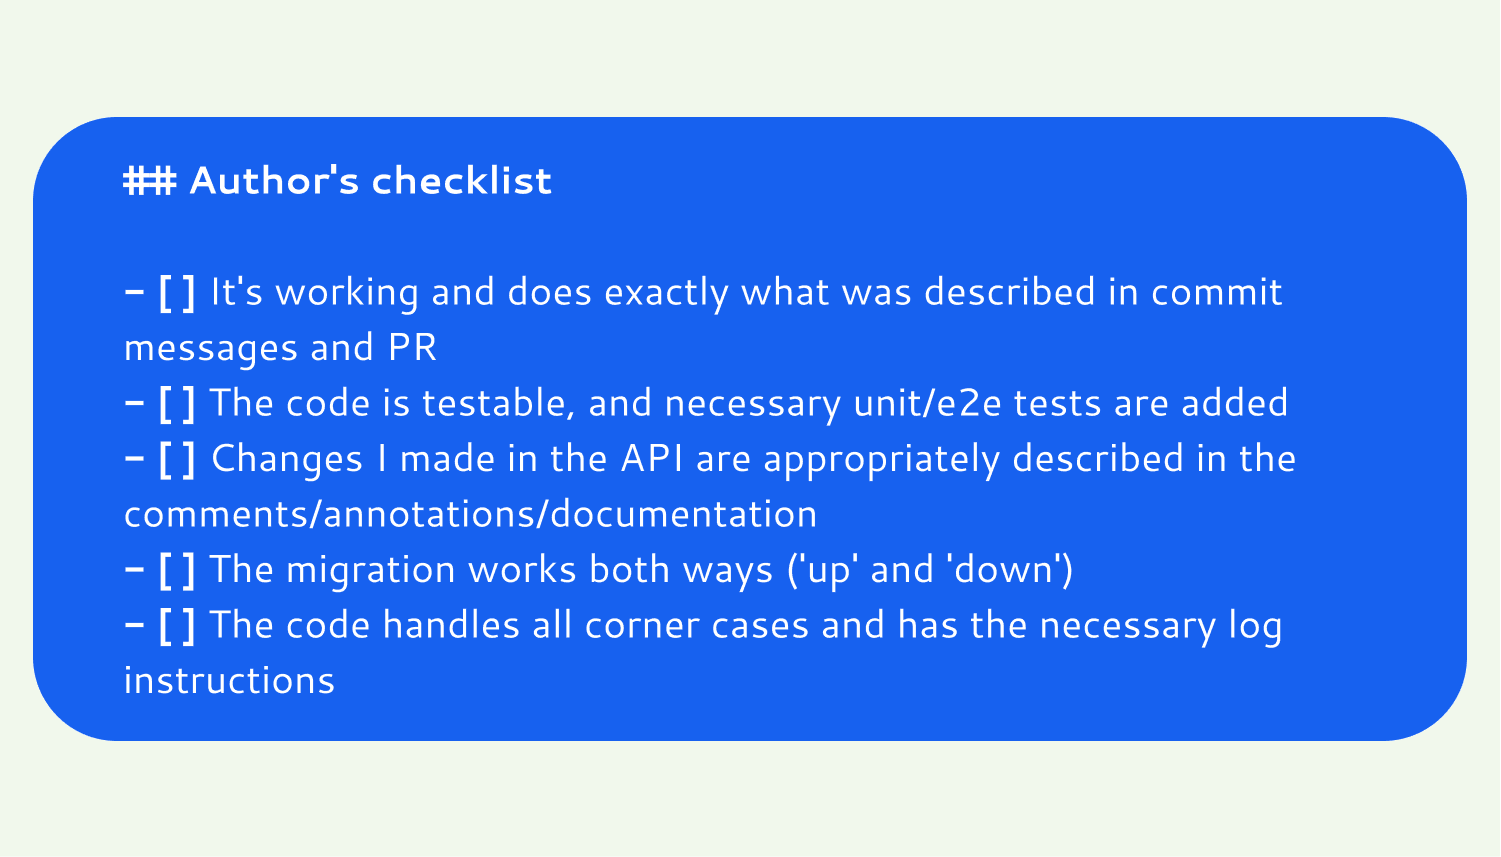 Author’s checklist for an efficient code review